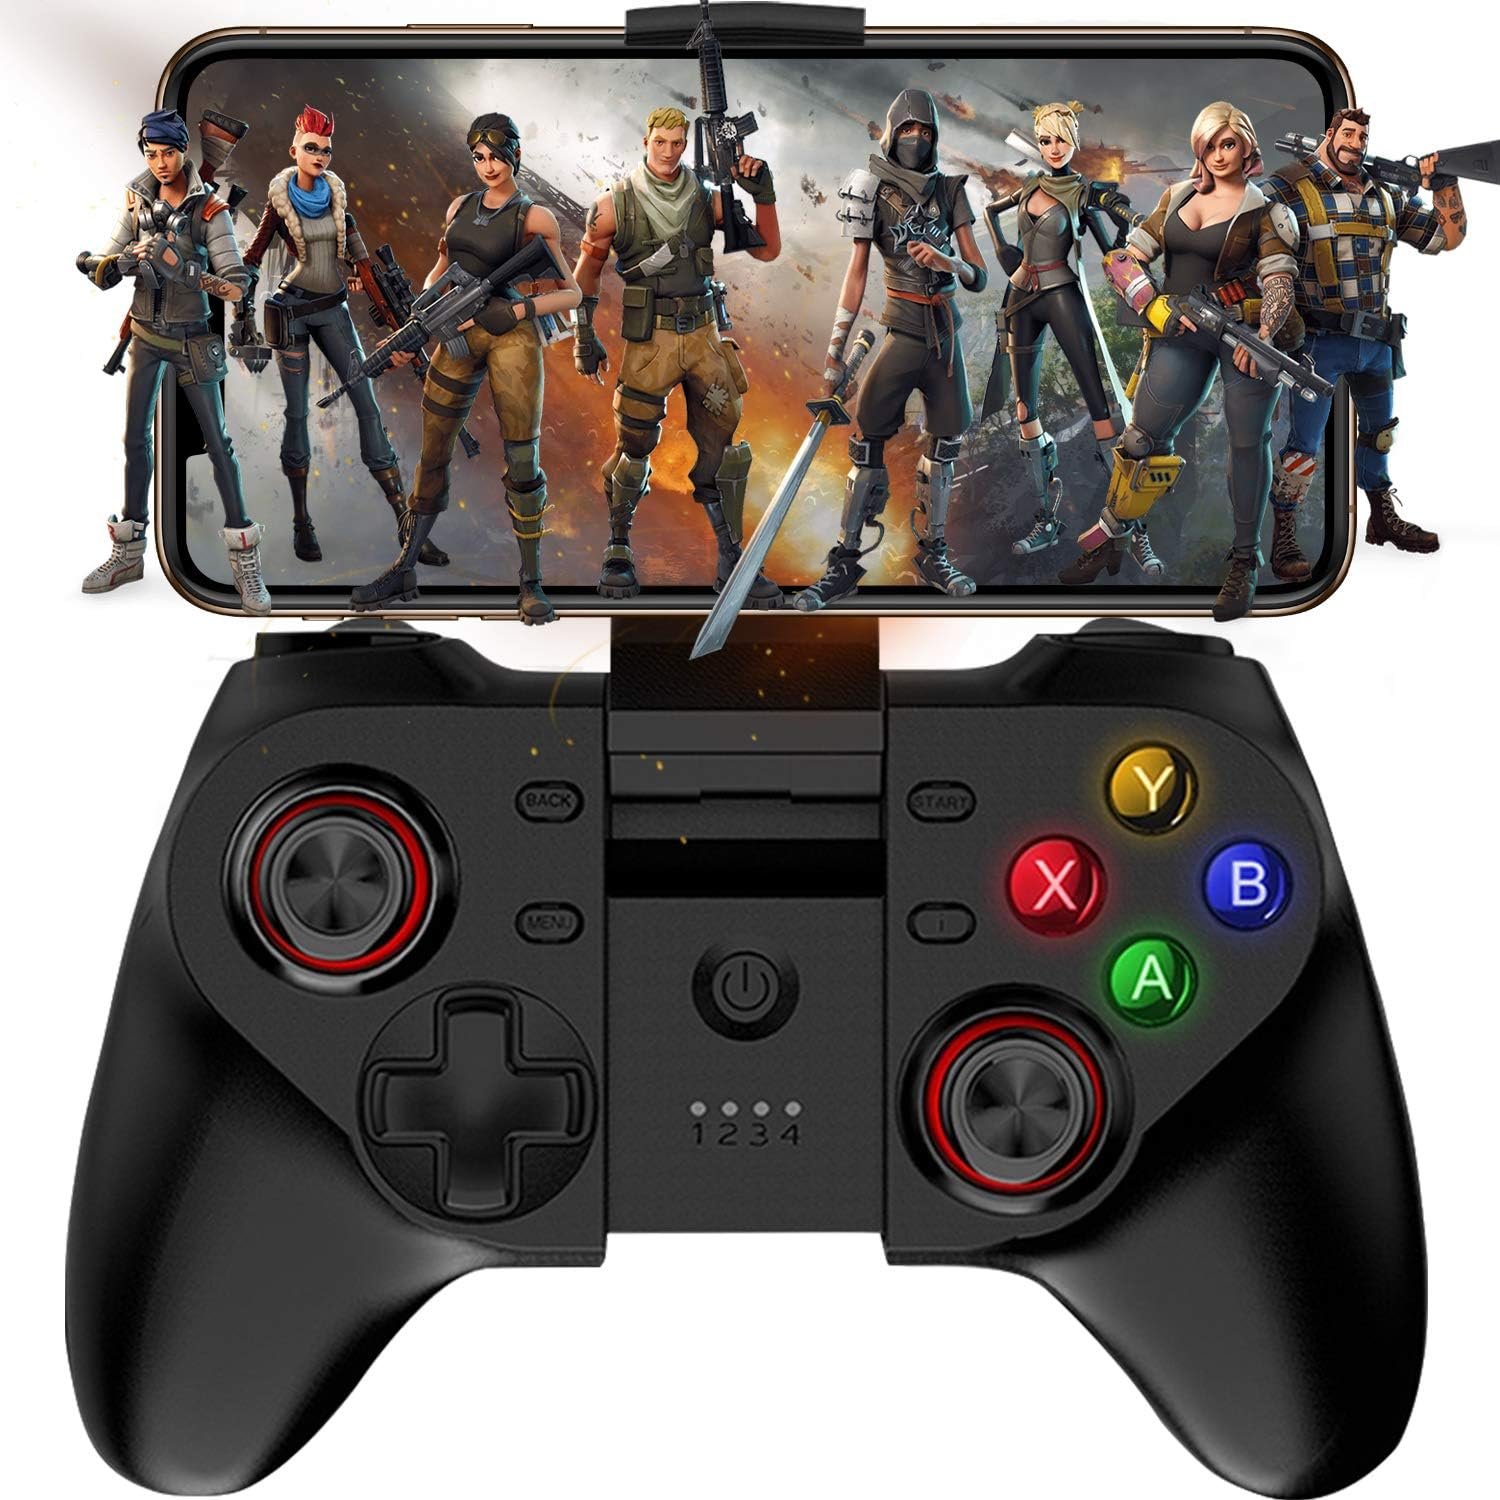 Megadream Android Game Controller, Wireless Key Mapping Gamepad Joystick Perfect for PUBG  COD, Compatible for Android Samsung Galaxy, LG, HTC, Huawei, Xiaomi Other Phone  Tablet (Not for iOS)